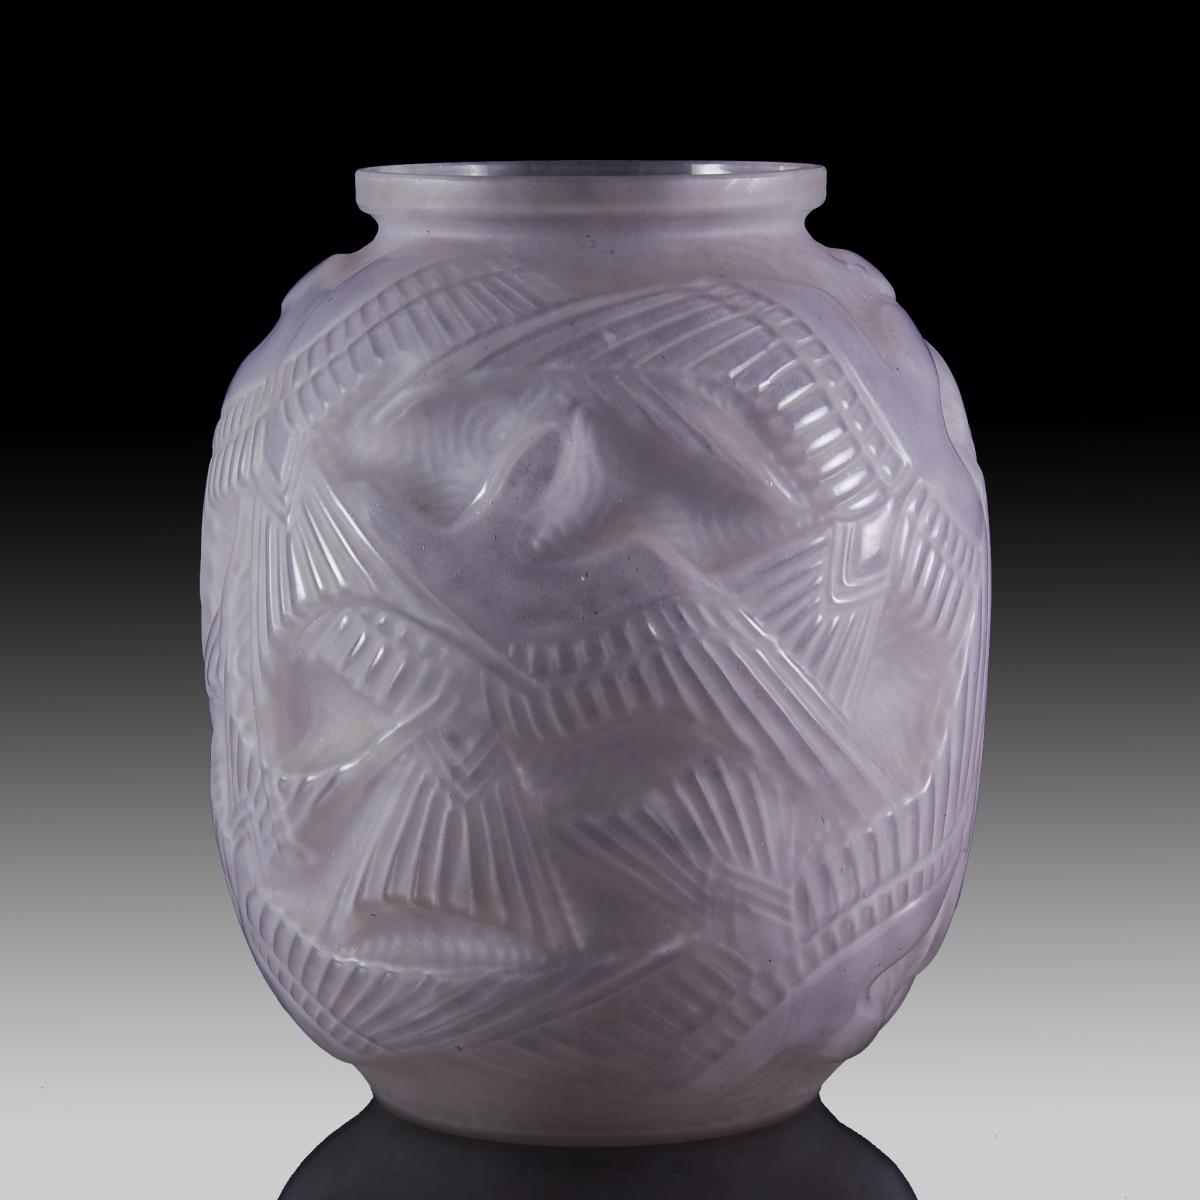 Art Deco Cameo Glass Vase "Swallows" by Pierre D'Avesn | BADA